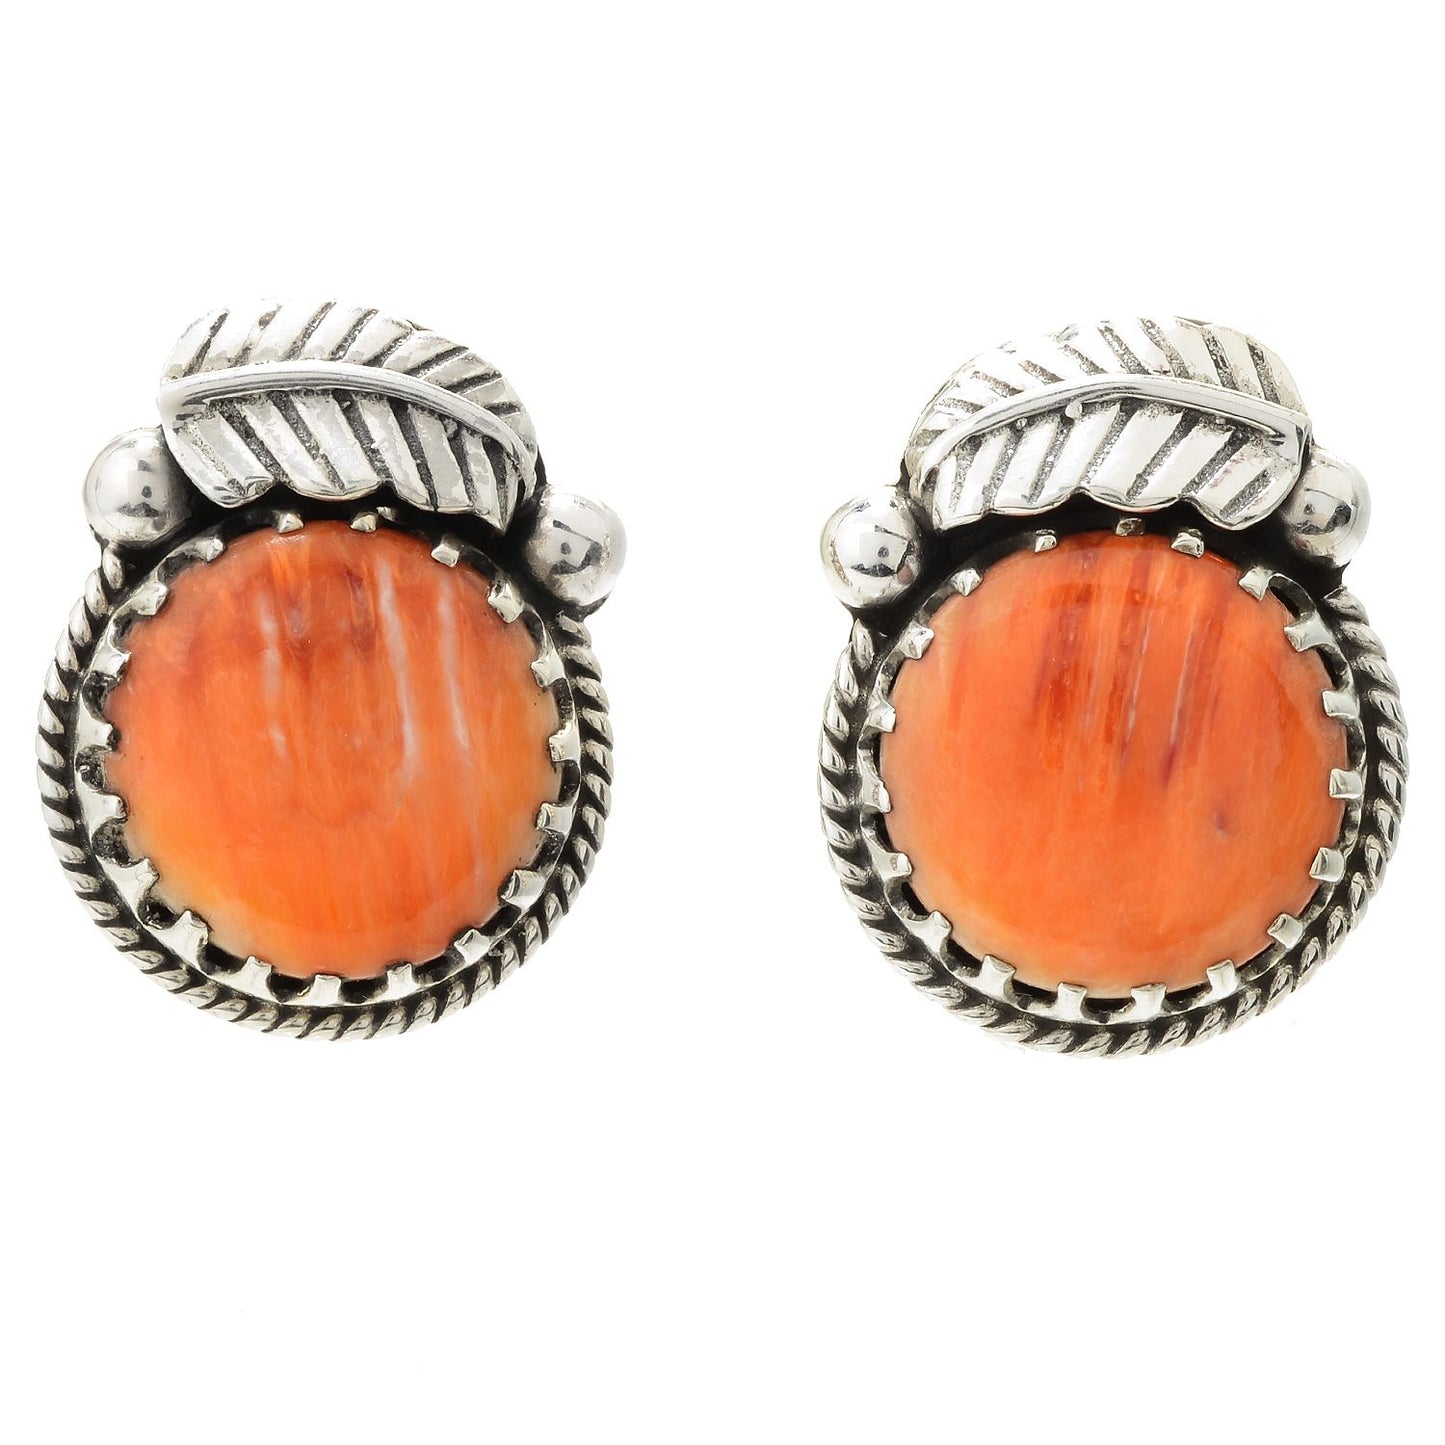 Pinctore Sterling Silver 15mm Round Orange Spiny Oyster Leaf Stud Earrings - pinctore